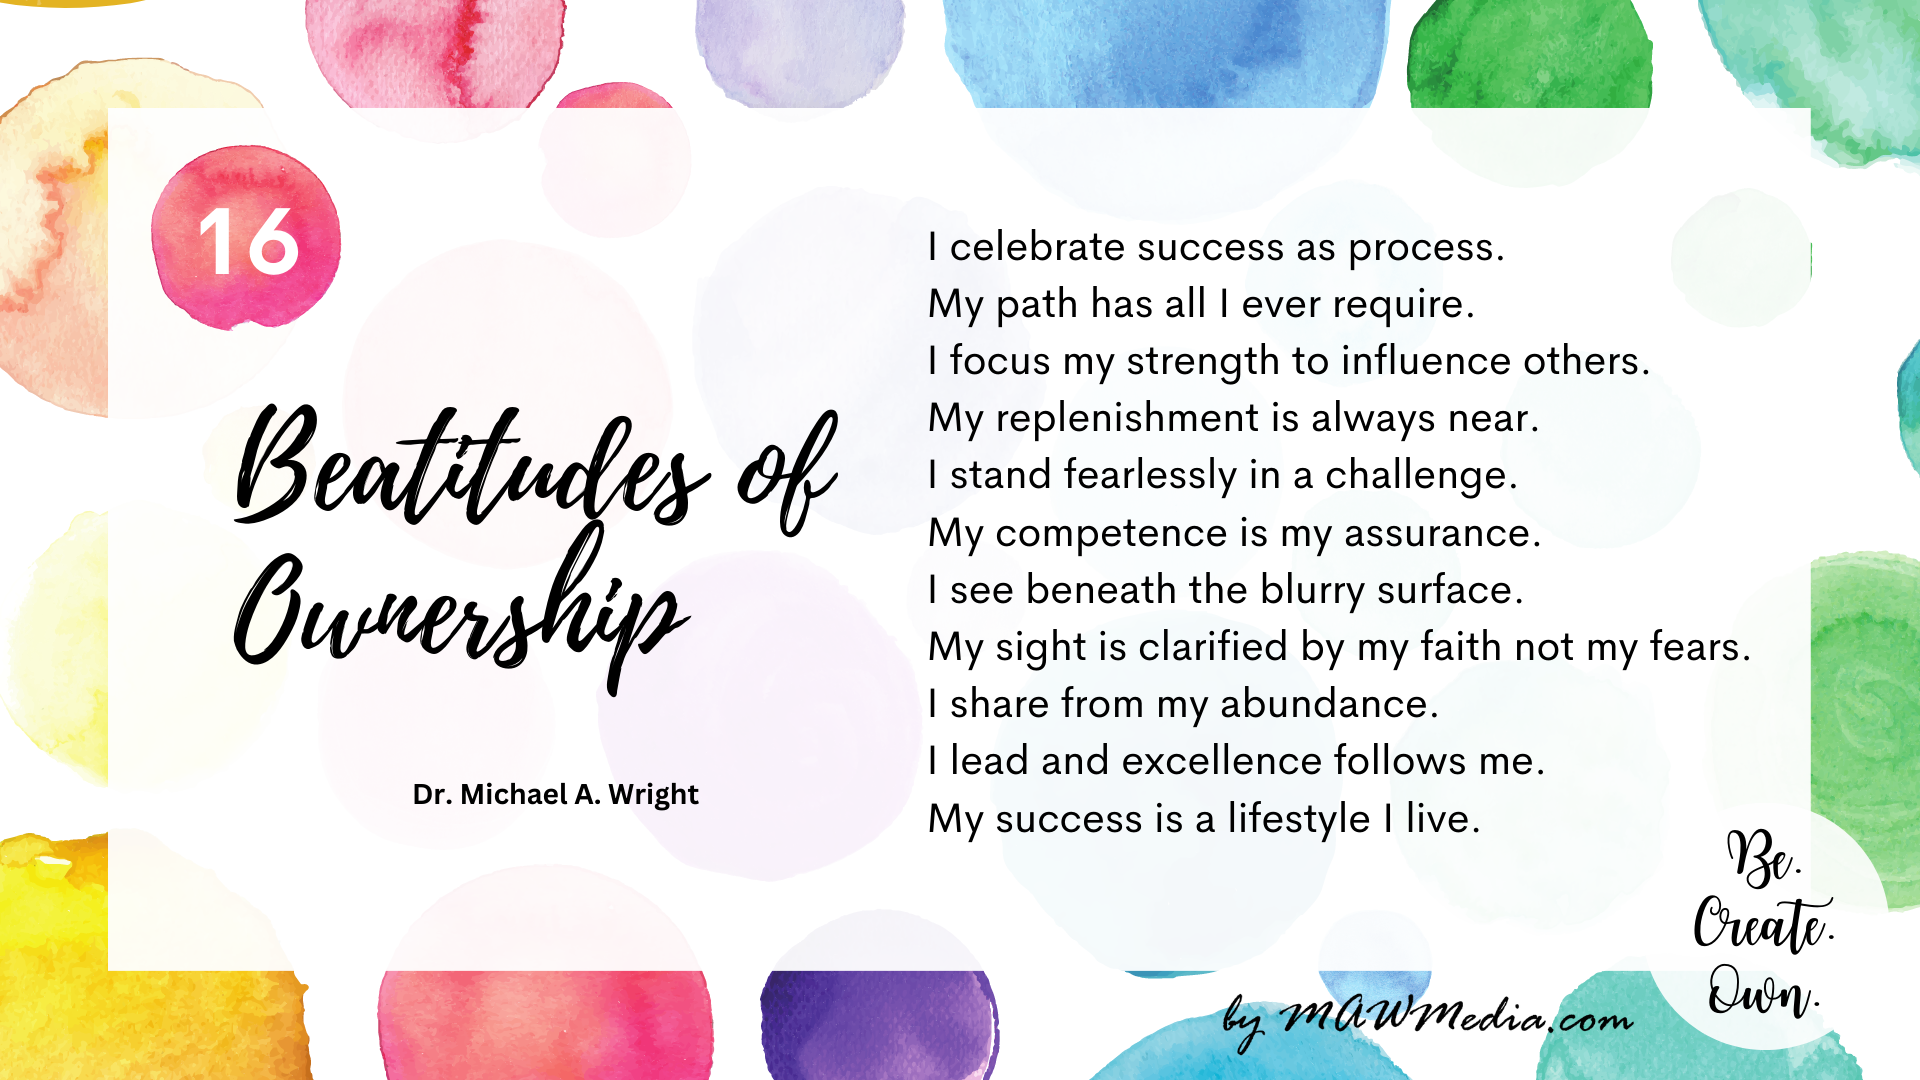 You are a natural leader, and you know that leading through celebration is the key to unlocking your full potential. Every day, you make it a point to celebrate the progress you've made, no matter how small it may seem. #Affirmations #BeCreateOwn #COACHMethod